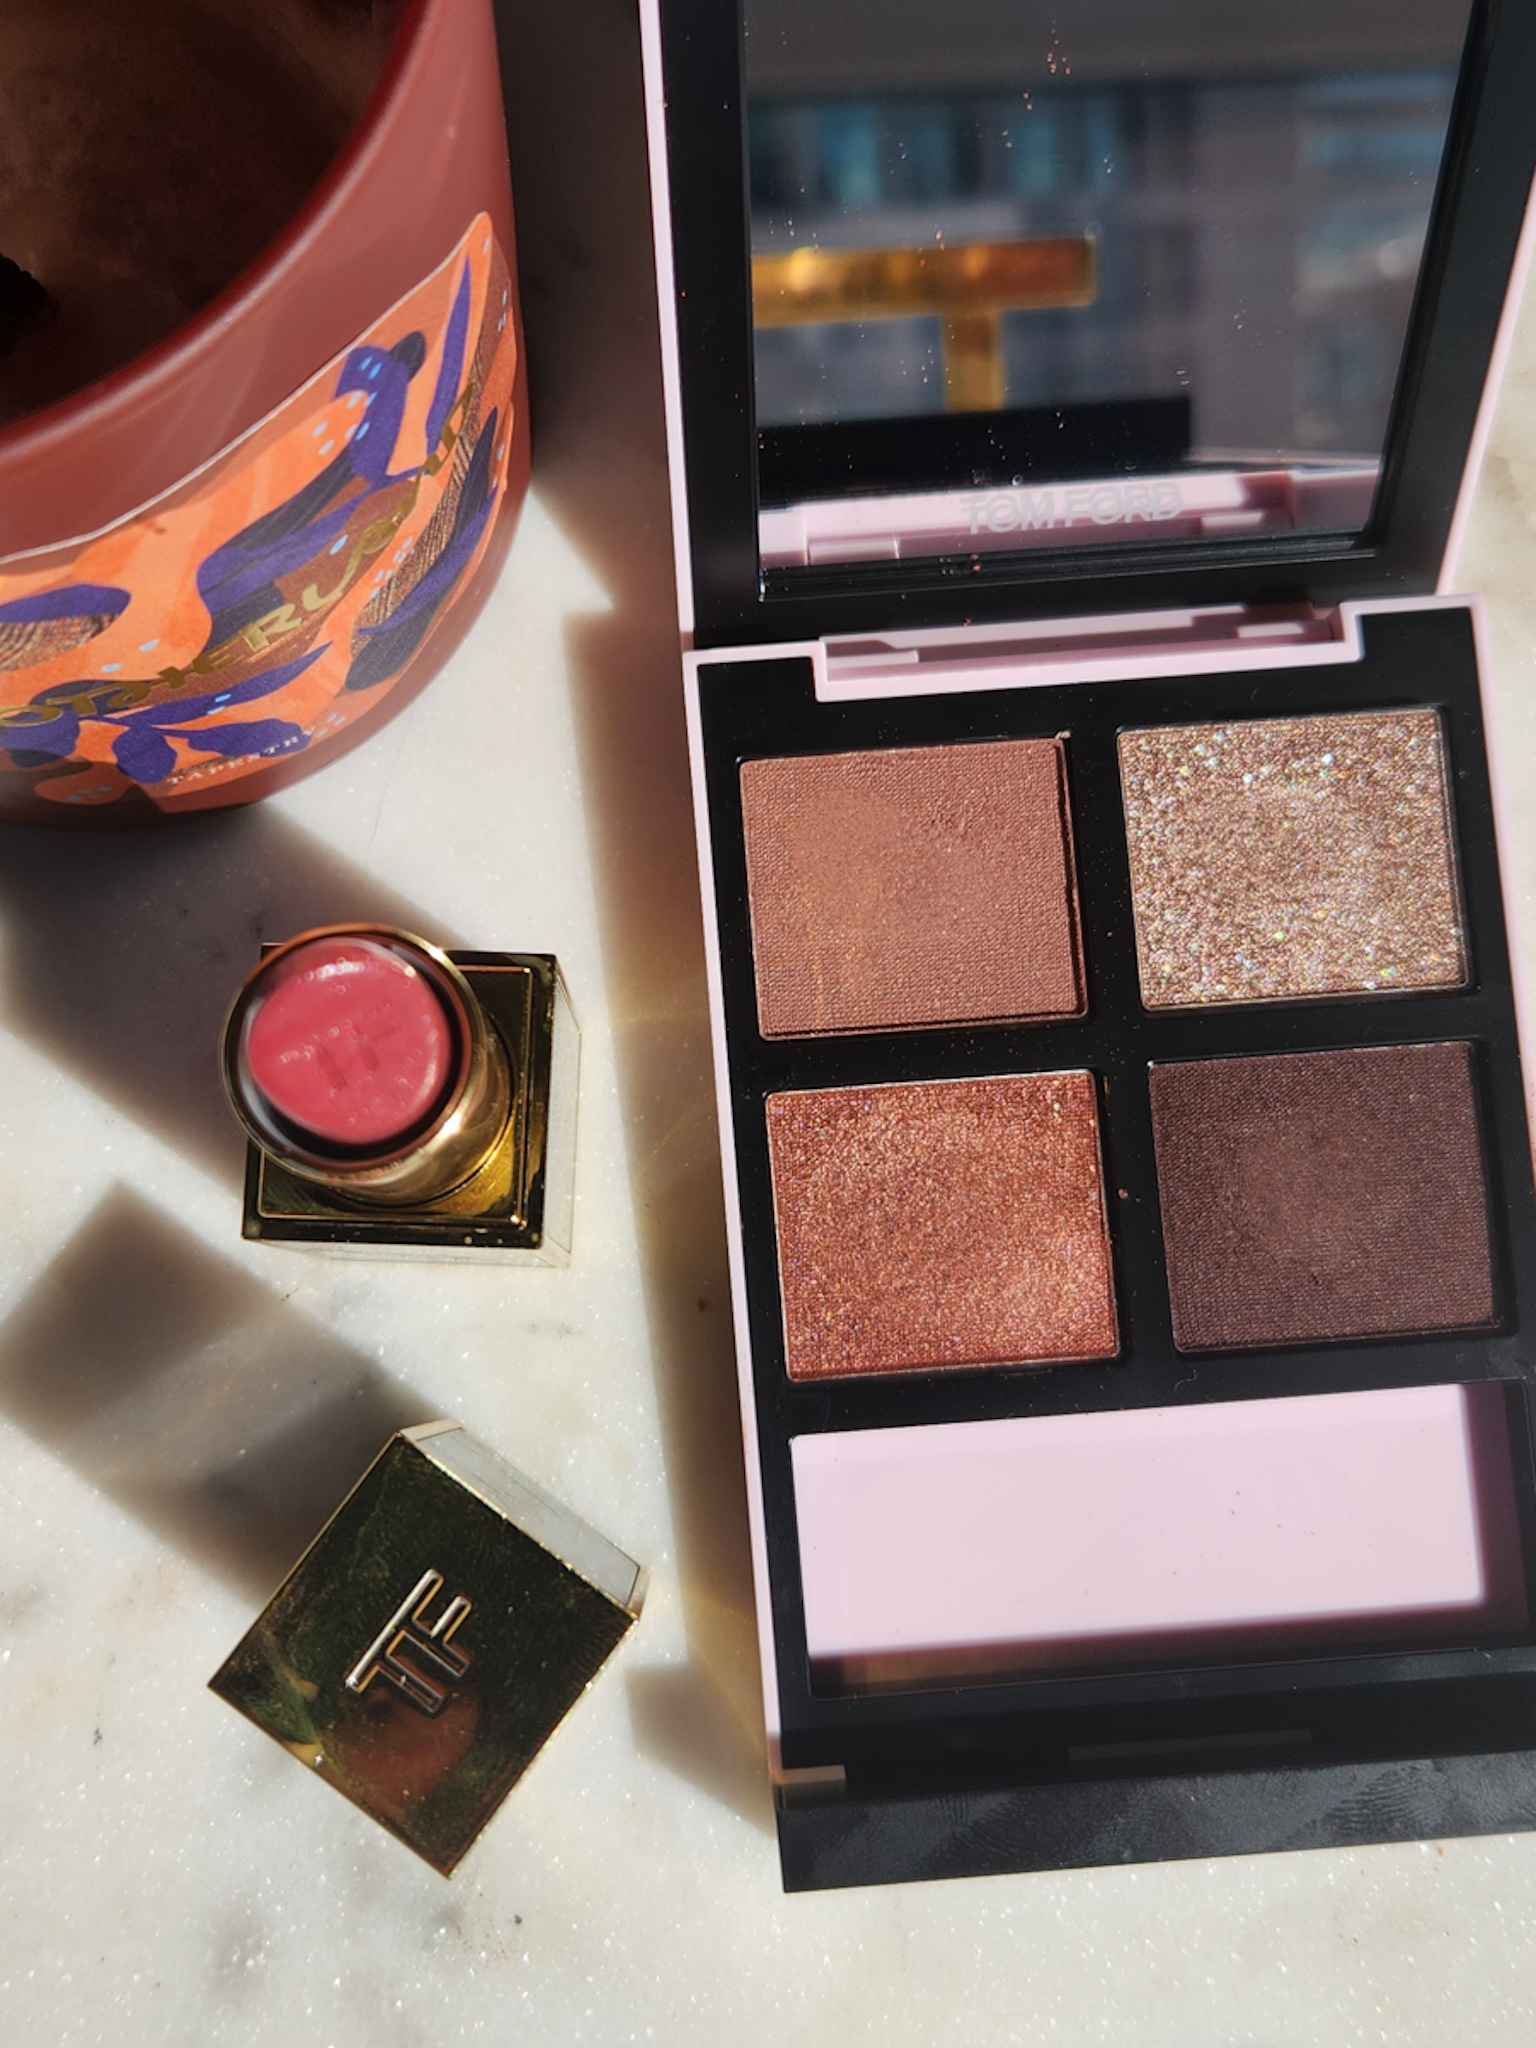 Tom Ford Forbidden Pink: review and swatches – Beauty Unhyped